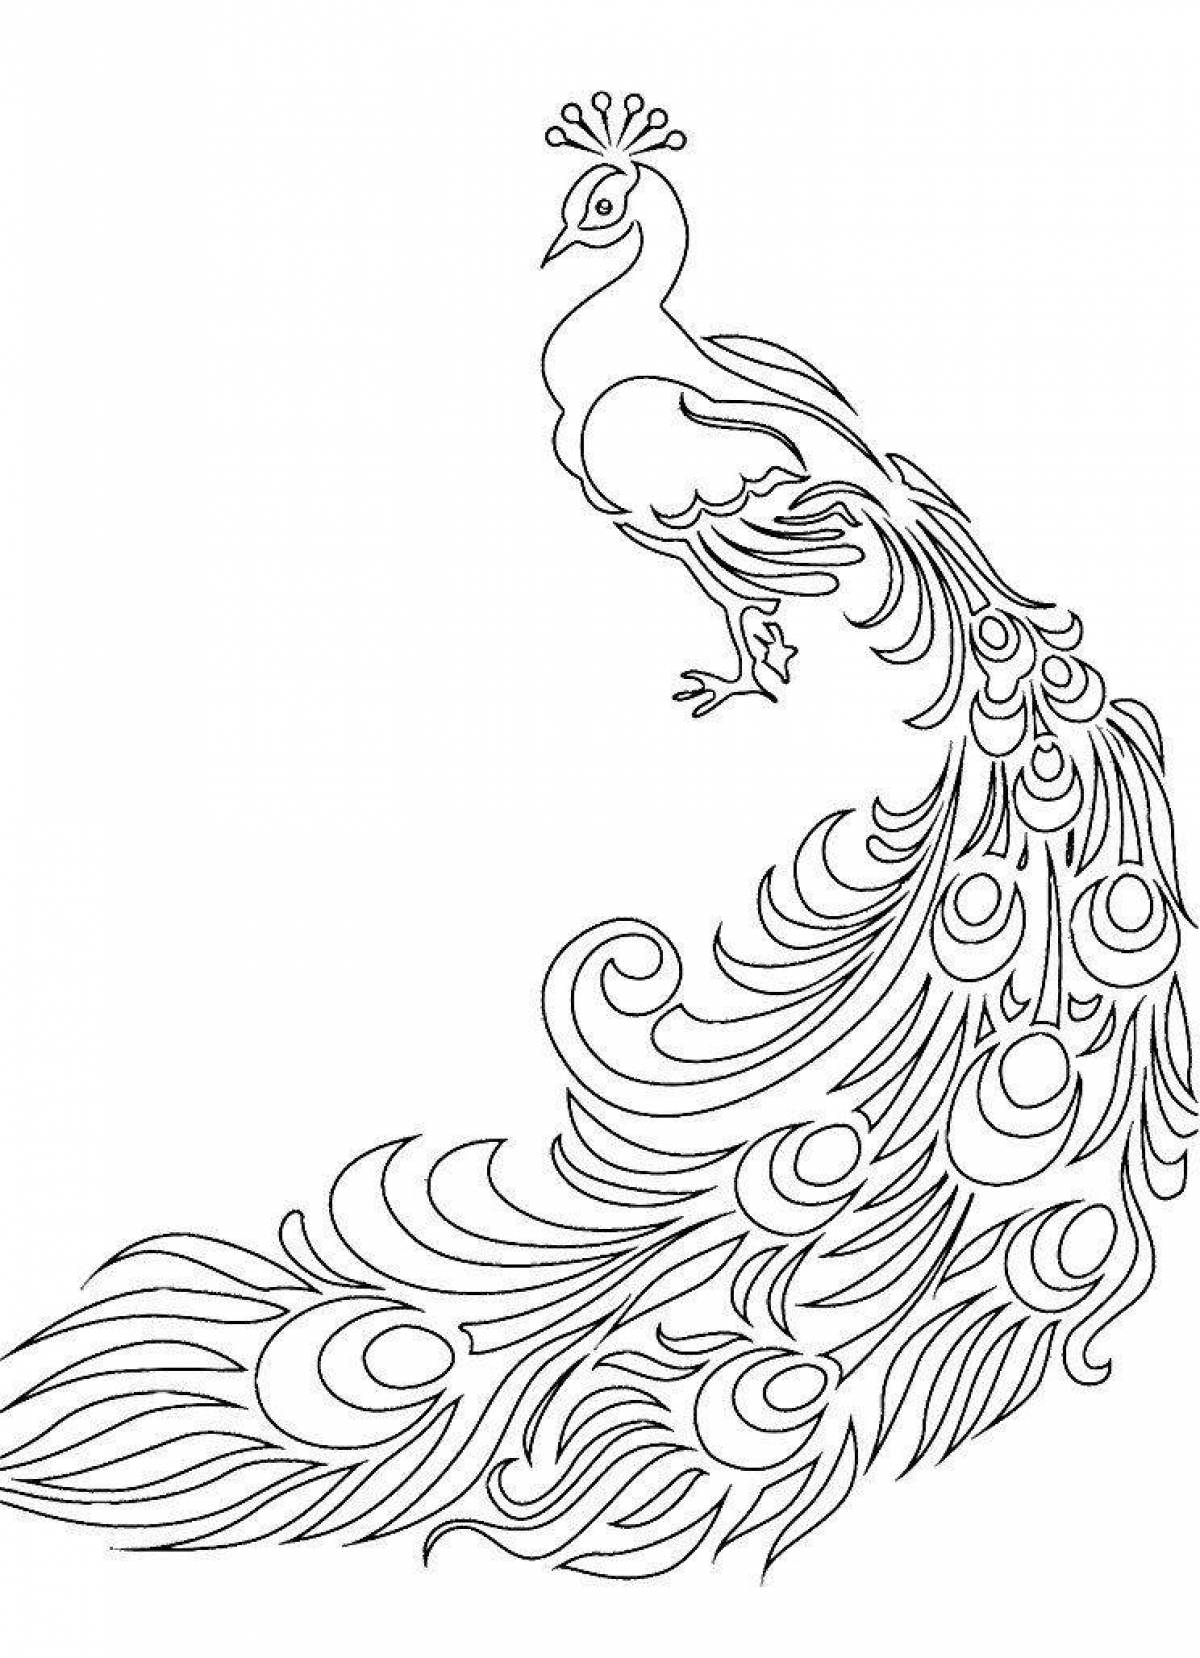 Living firebird coloring pages for kids